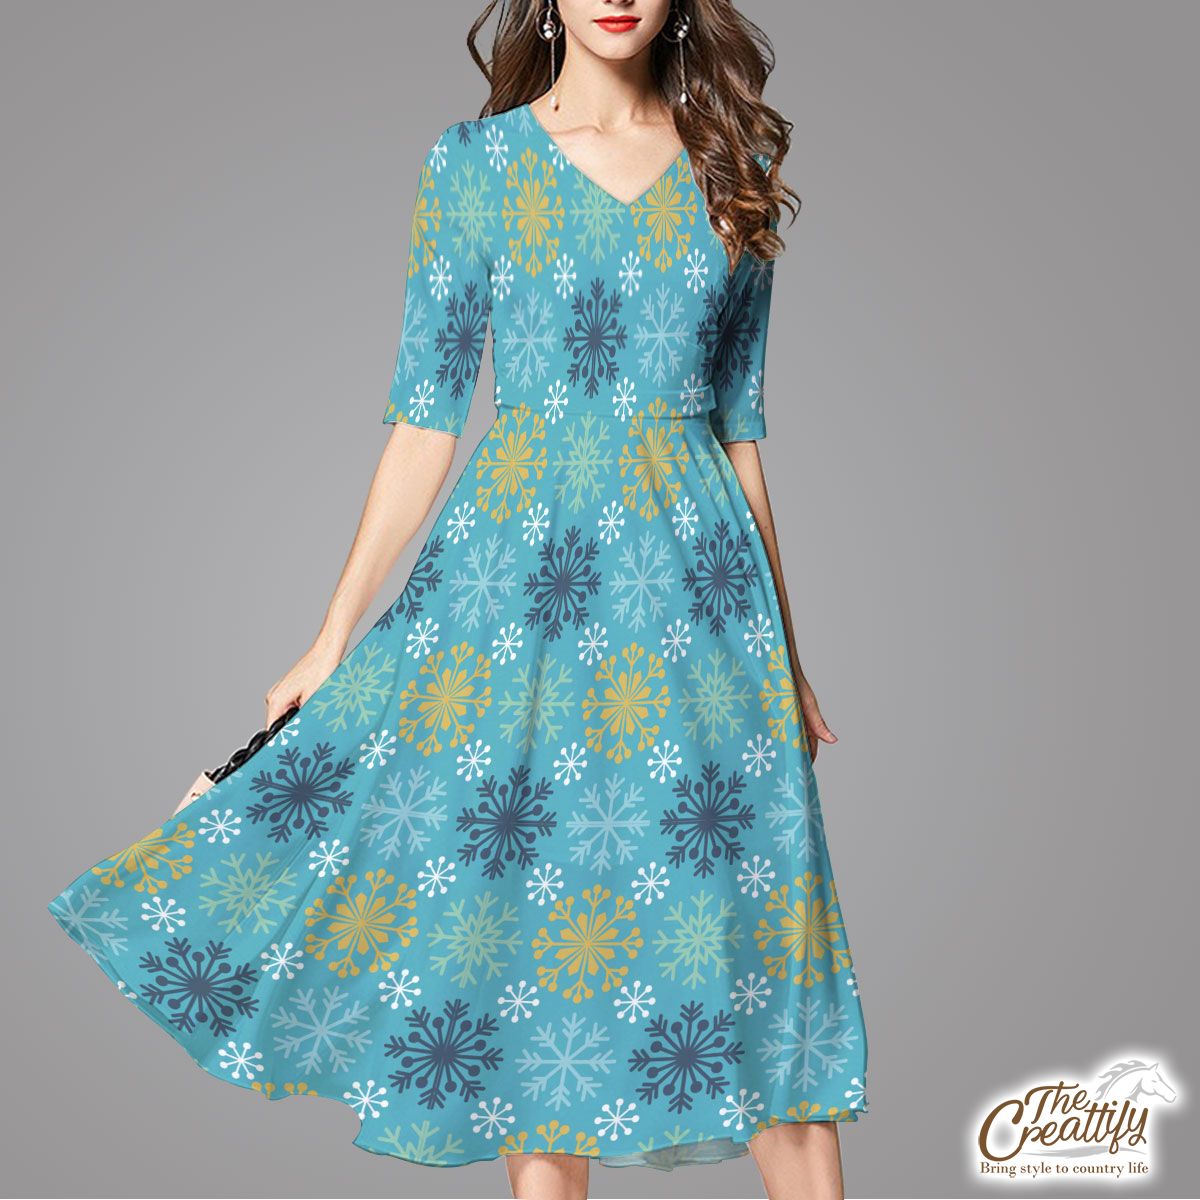 Blue And Yellow Snowflake Pattern Flare Dress